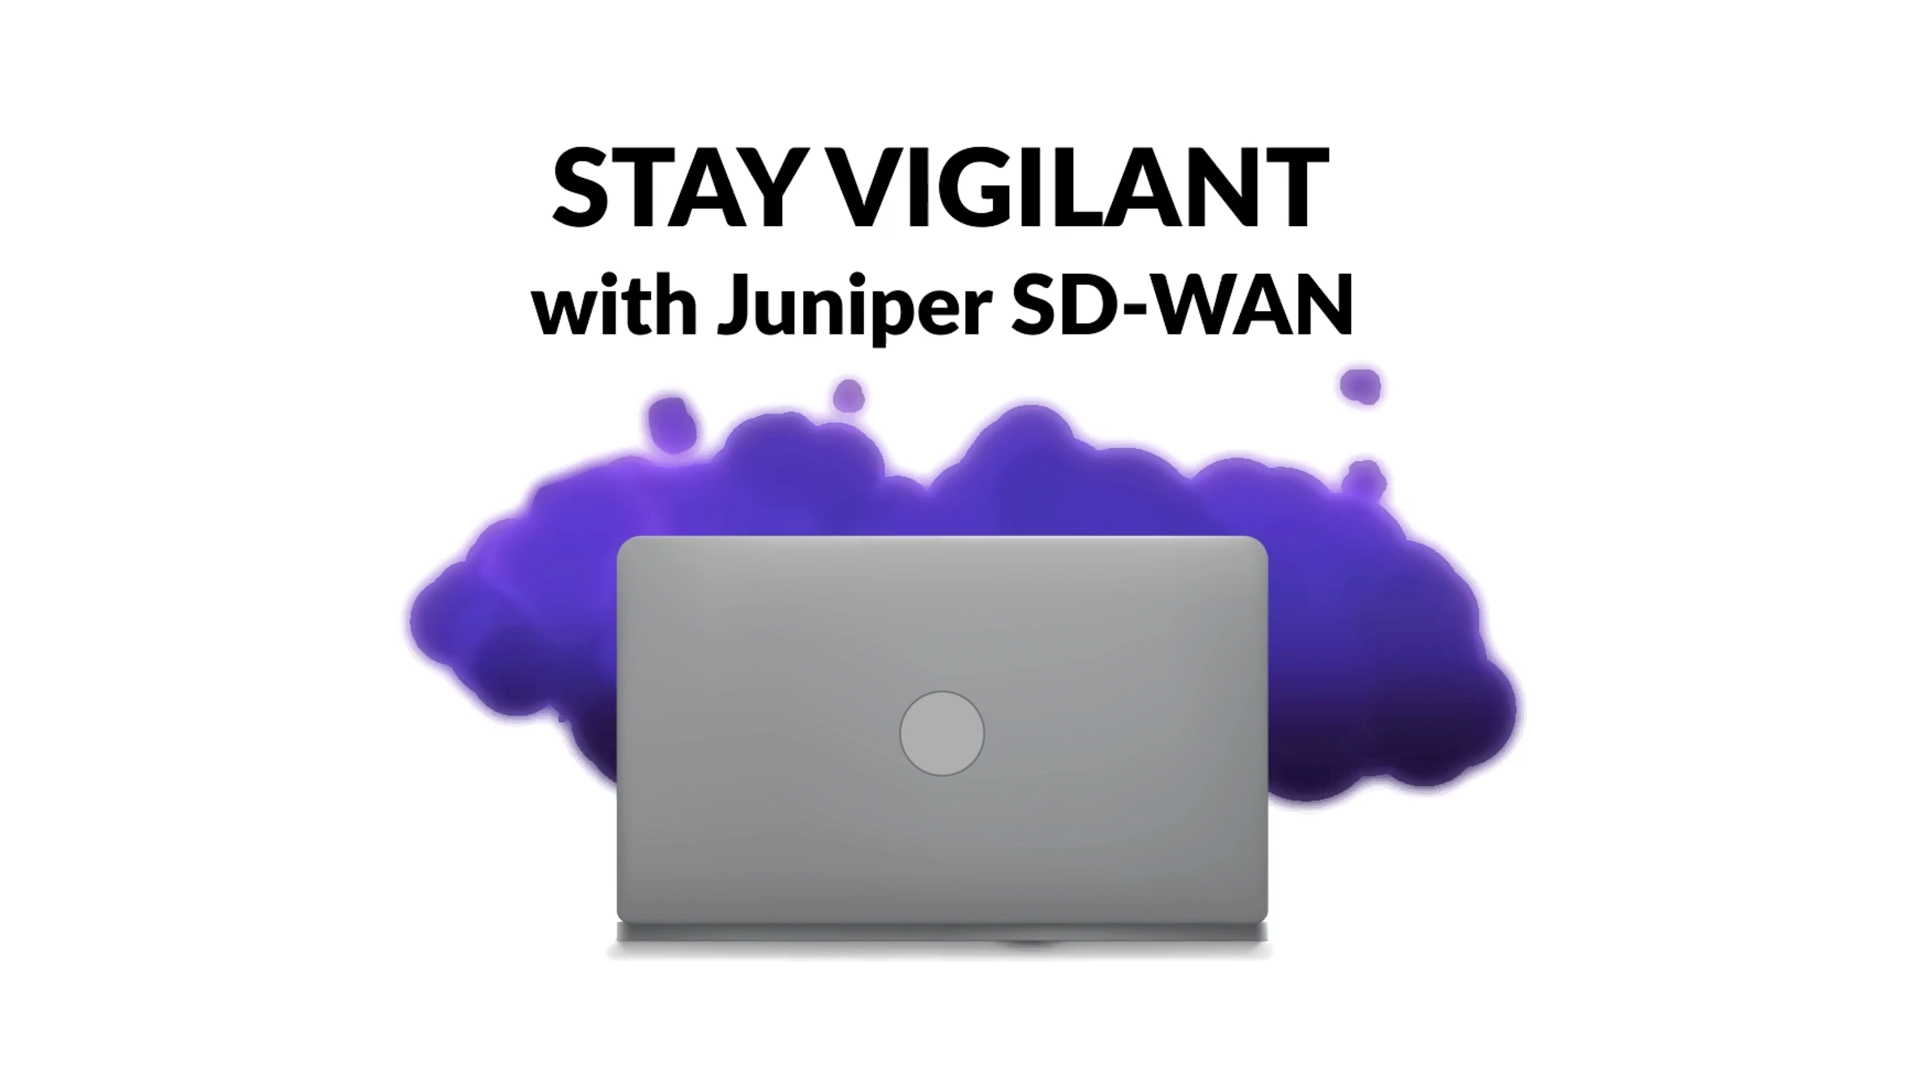 Images from our Juniper SD-Wan animated video series. The image shows comic like clouds coming out of a laptop with the text Stay Vigilant with Juniper SD-WAN above it.